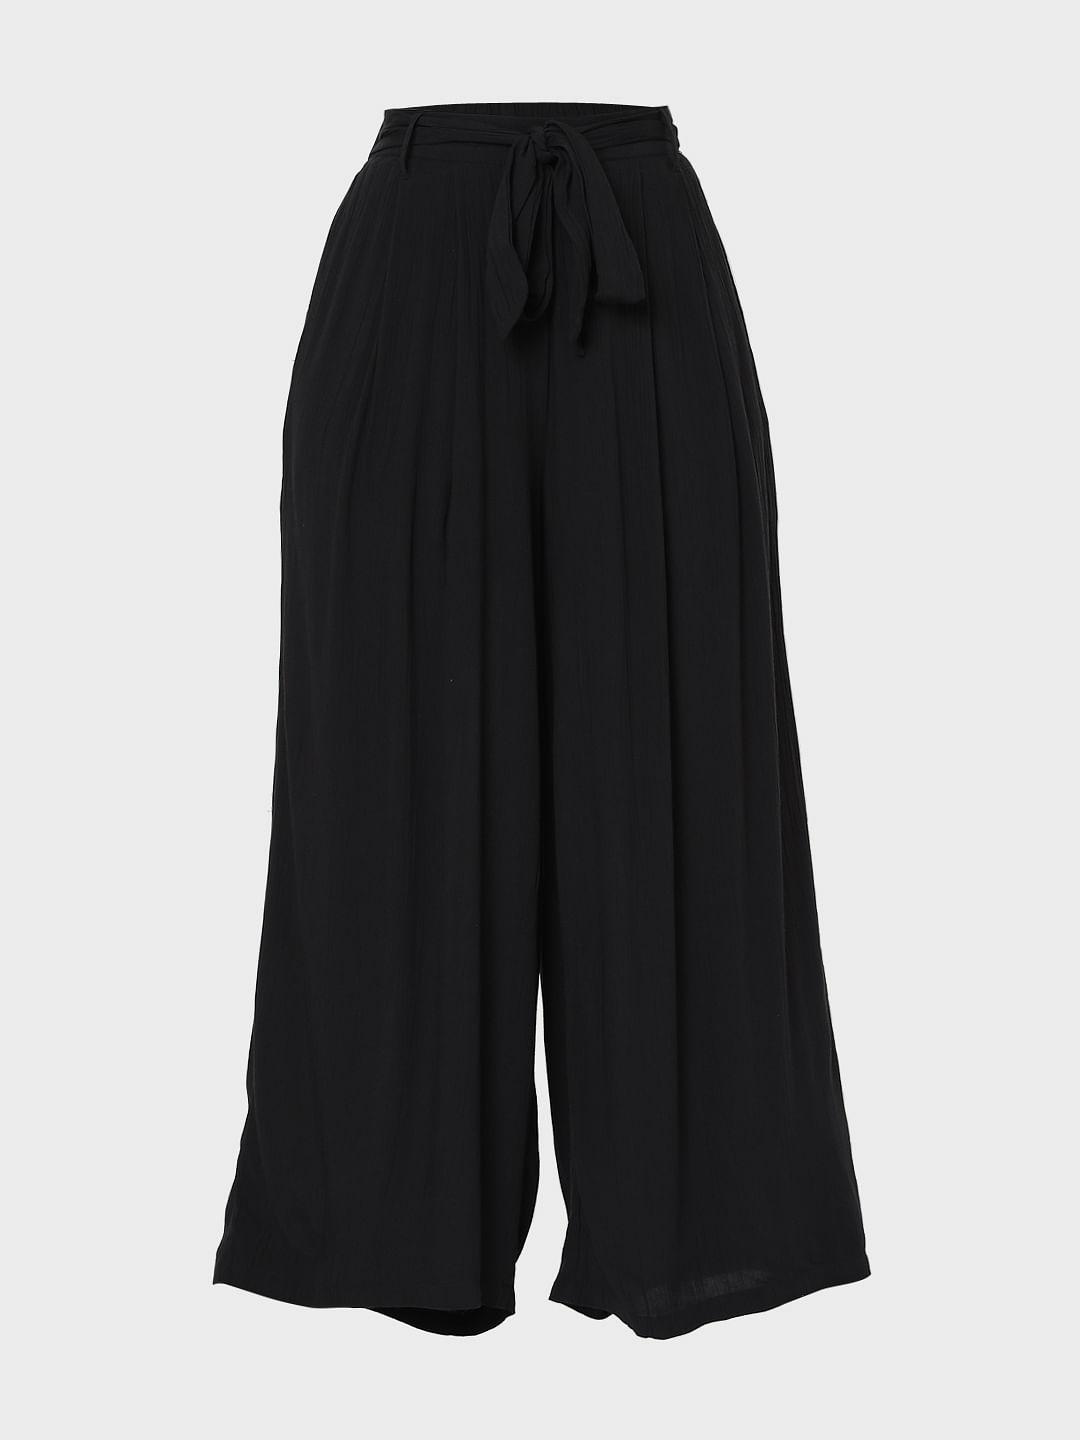 Prettygarden Lightweight Palazzo Pants Are a Must for Spring | Us Weekly